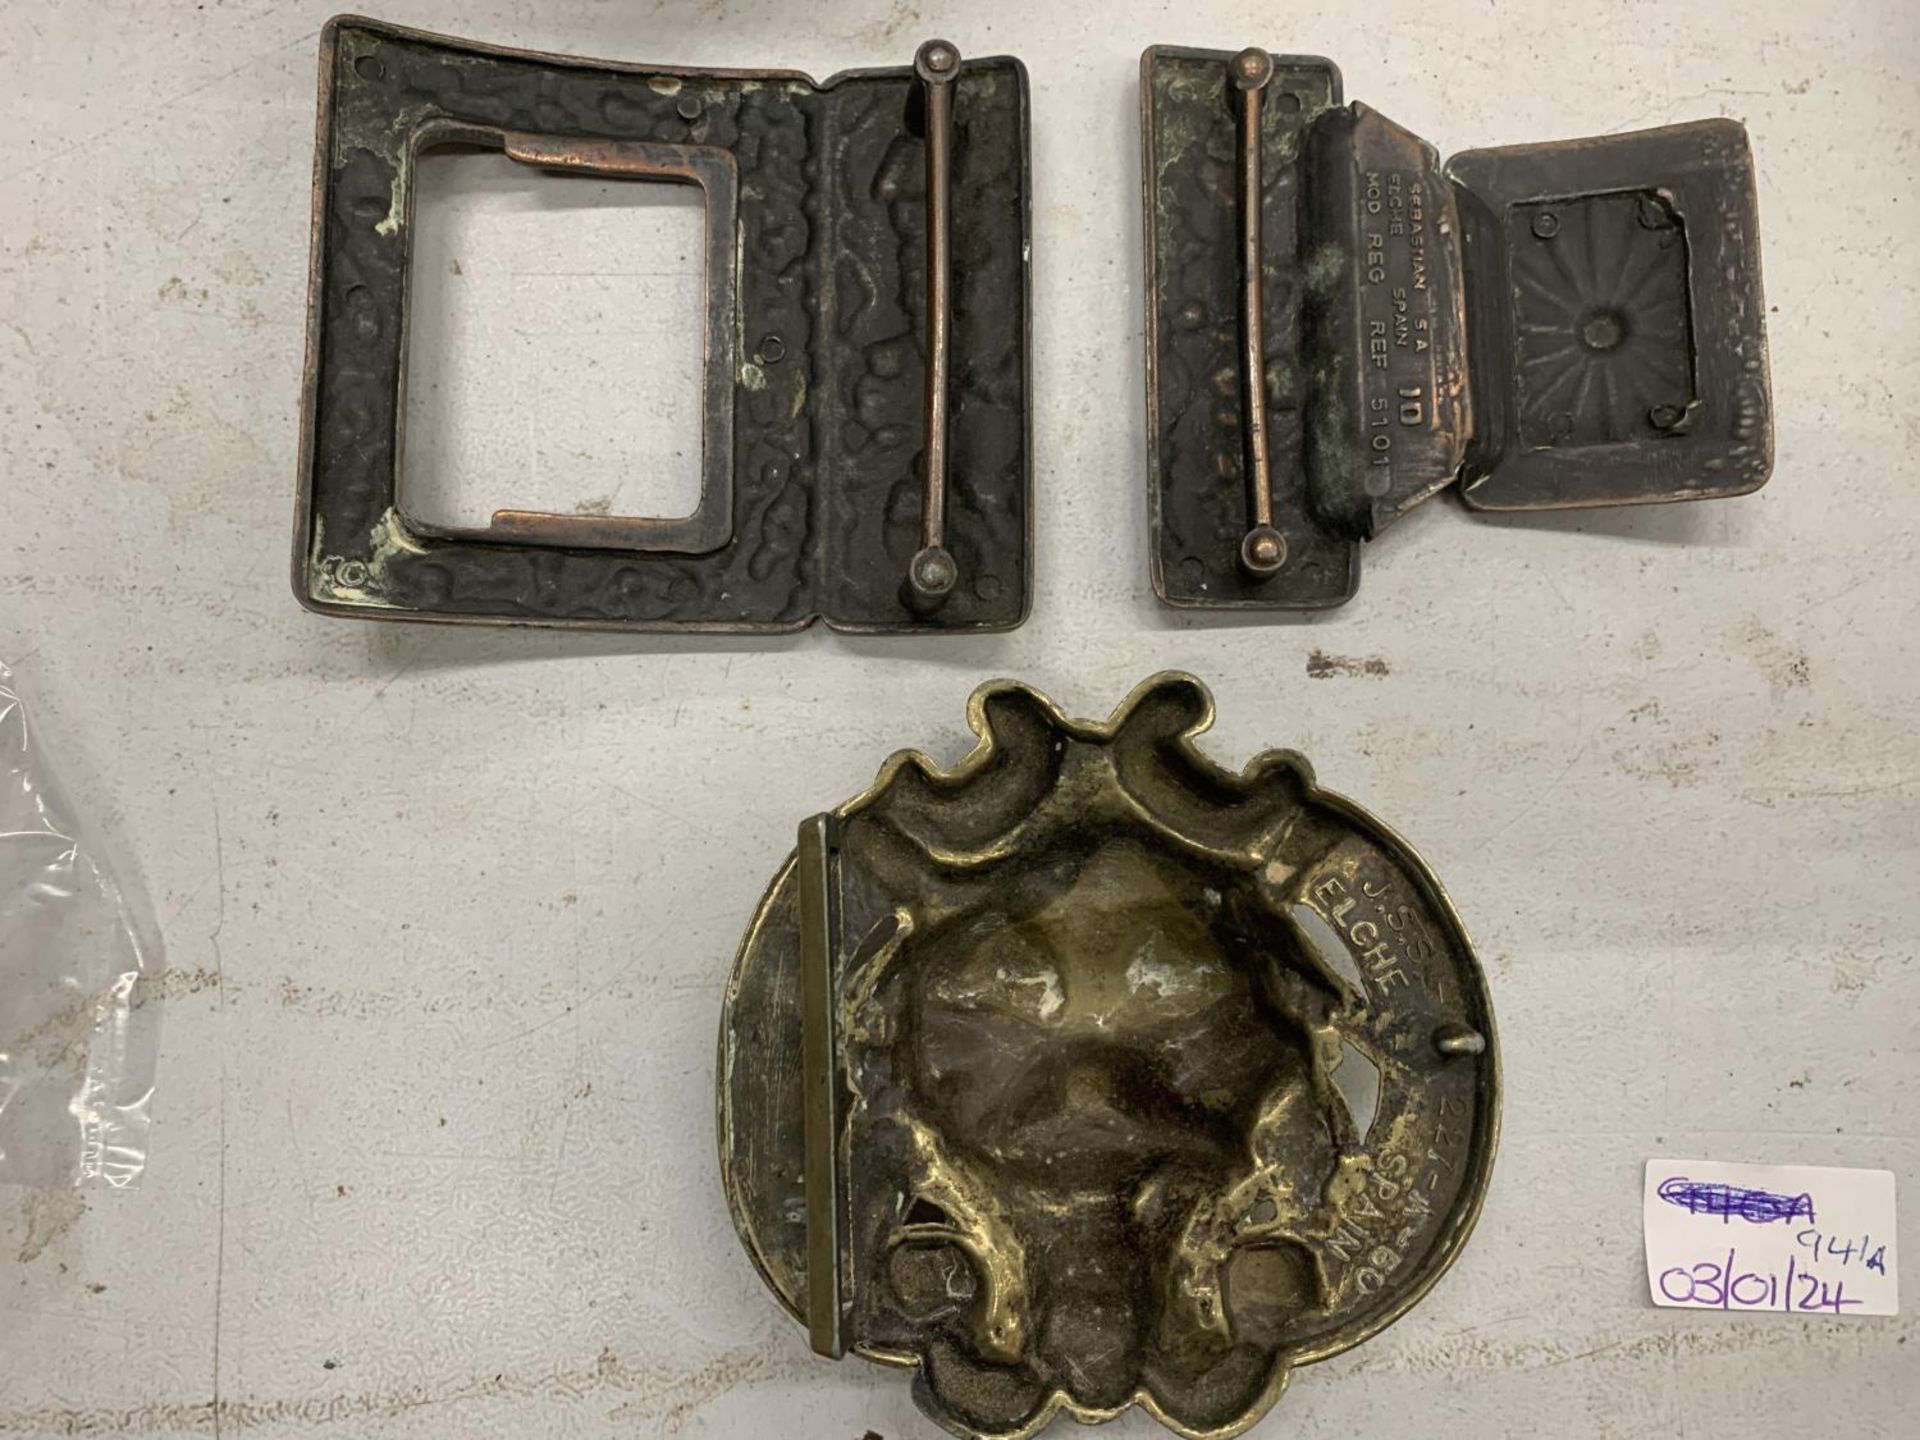 TWO LARGE ORNATE BELT BUCKLES - Image 3 of 3